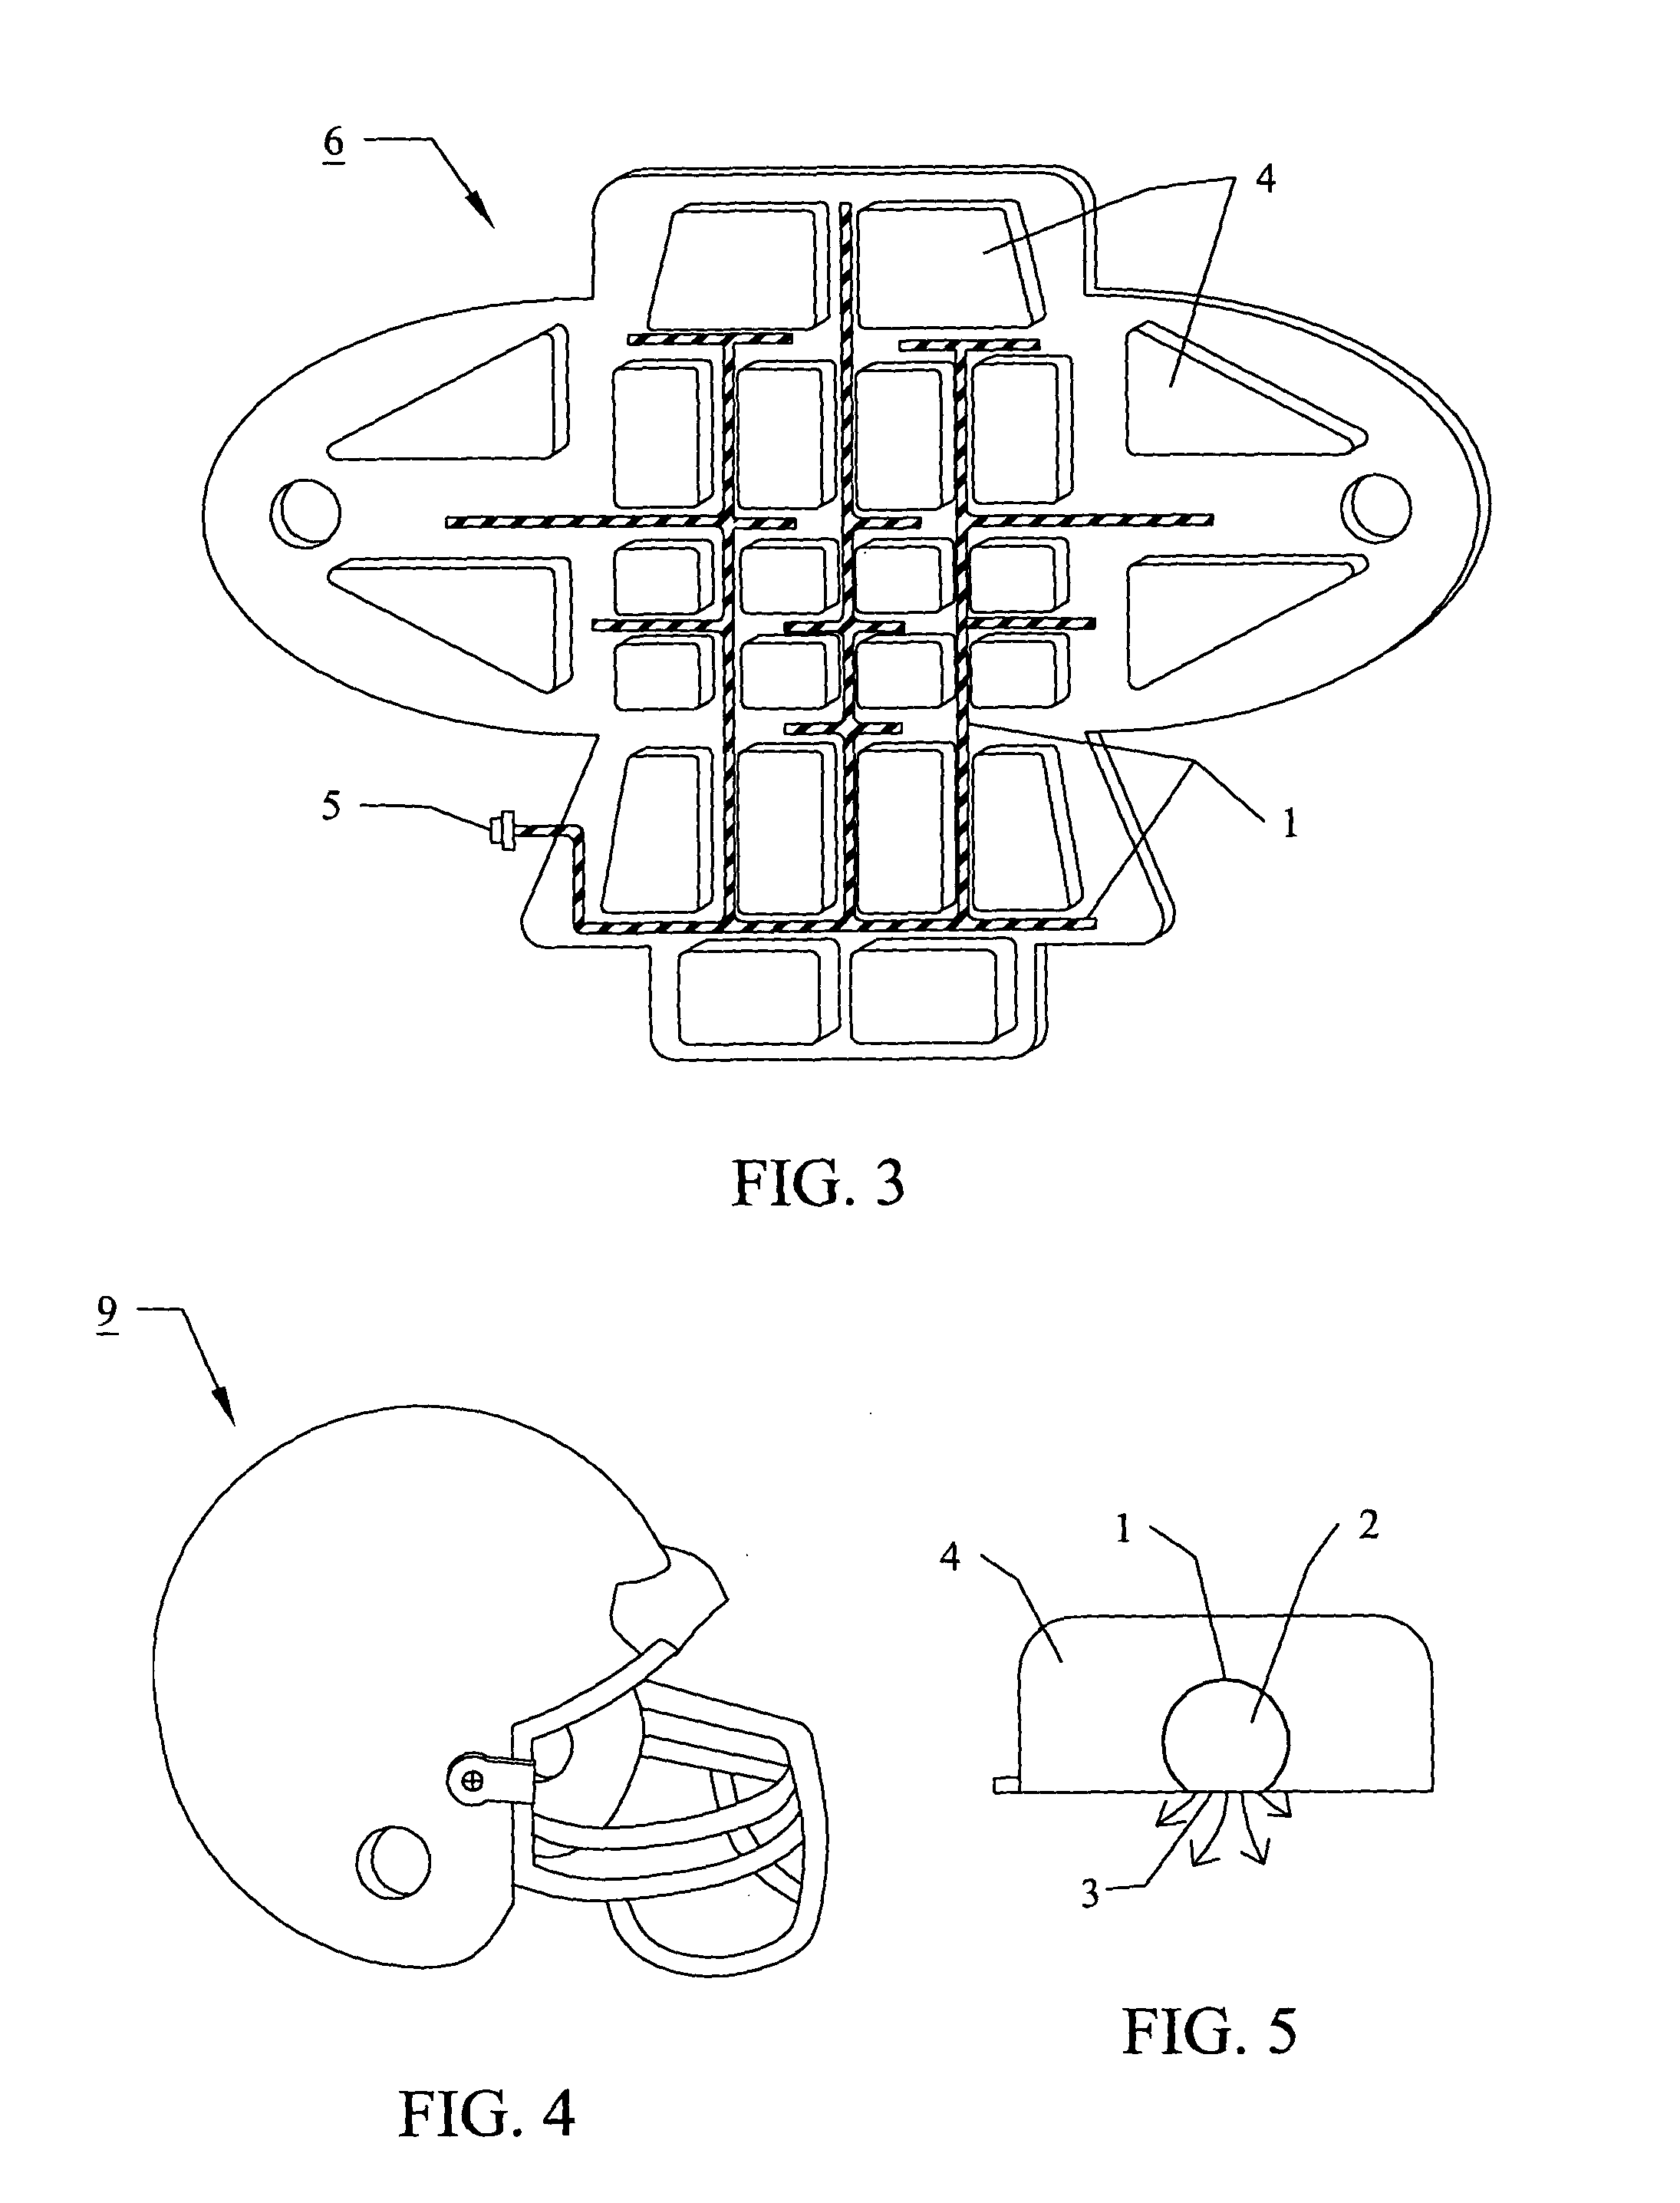 Materials and methods for maintaining proper body temperature